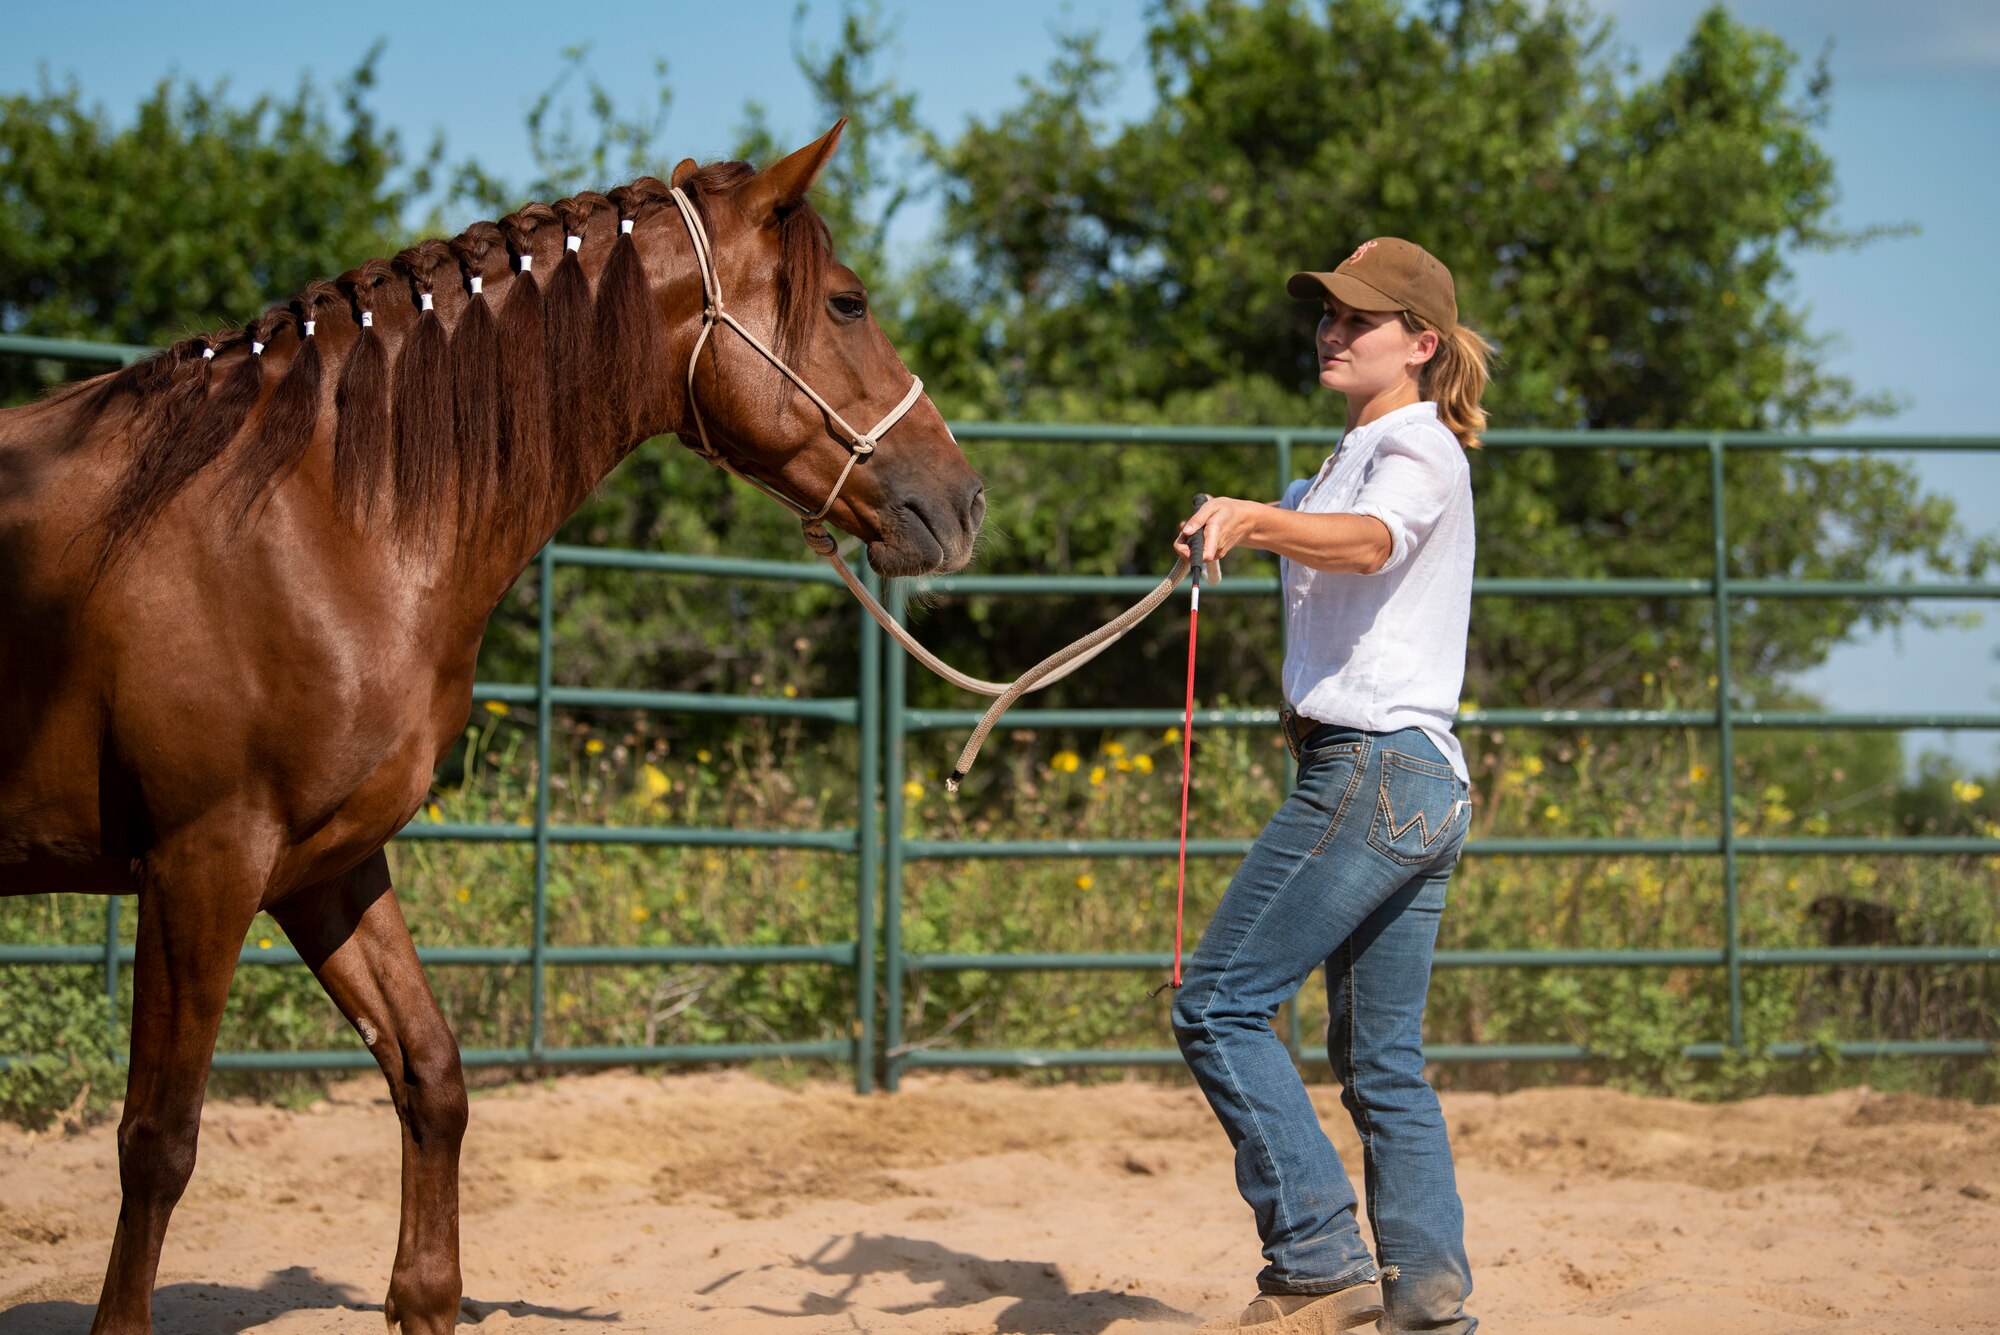 Staff Sgt. Melissa Sekerak, 7th Munitions Squadron stockpile management supervisor, leads her horse, Malibu, around a training ring in Hawley, Texas, July 20, 2021.